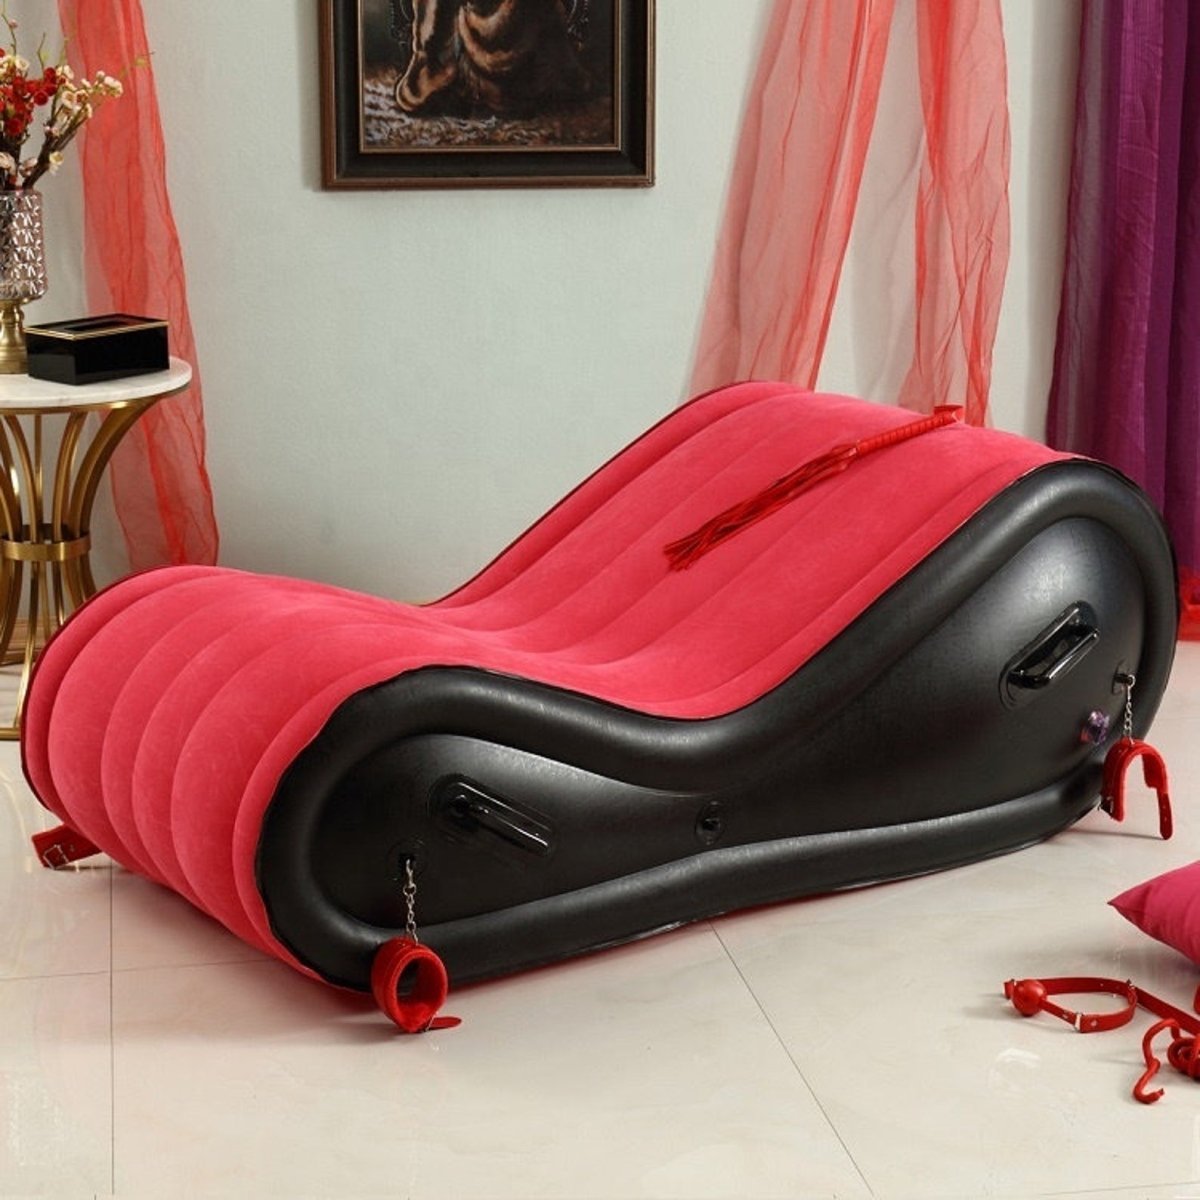 Looking for High-Quality BDSM Bondage Furniture? Oxy-Shop pic